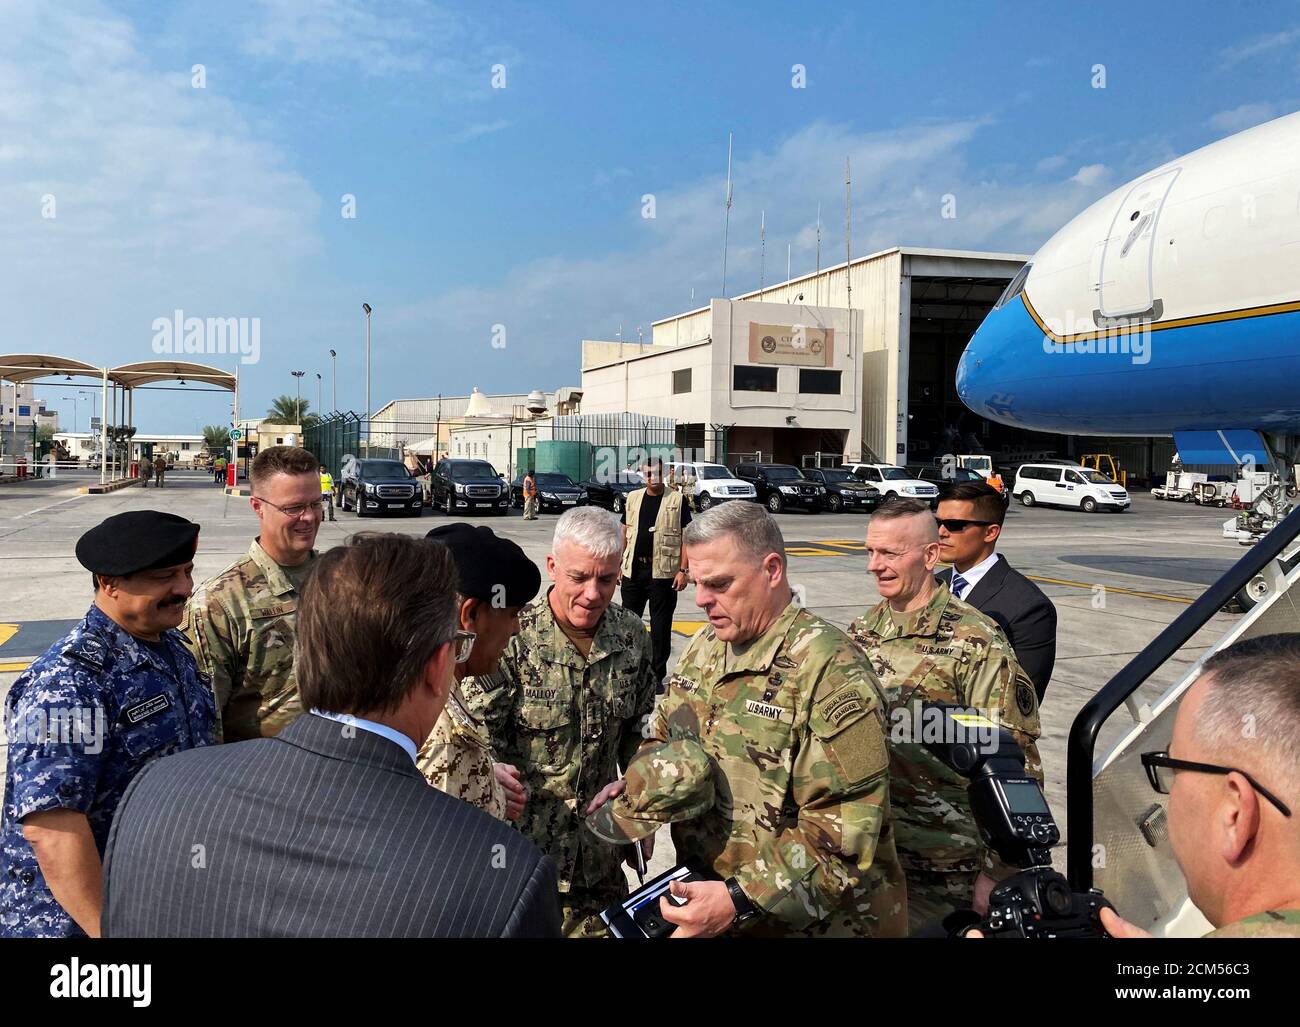 Chairman of the Joint Chiefs of Staff General Mark Milley arrives in Manama, Bahrain on November 25, 2019. REUTERS/Idrees Ali Stock Photo